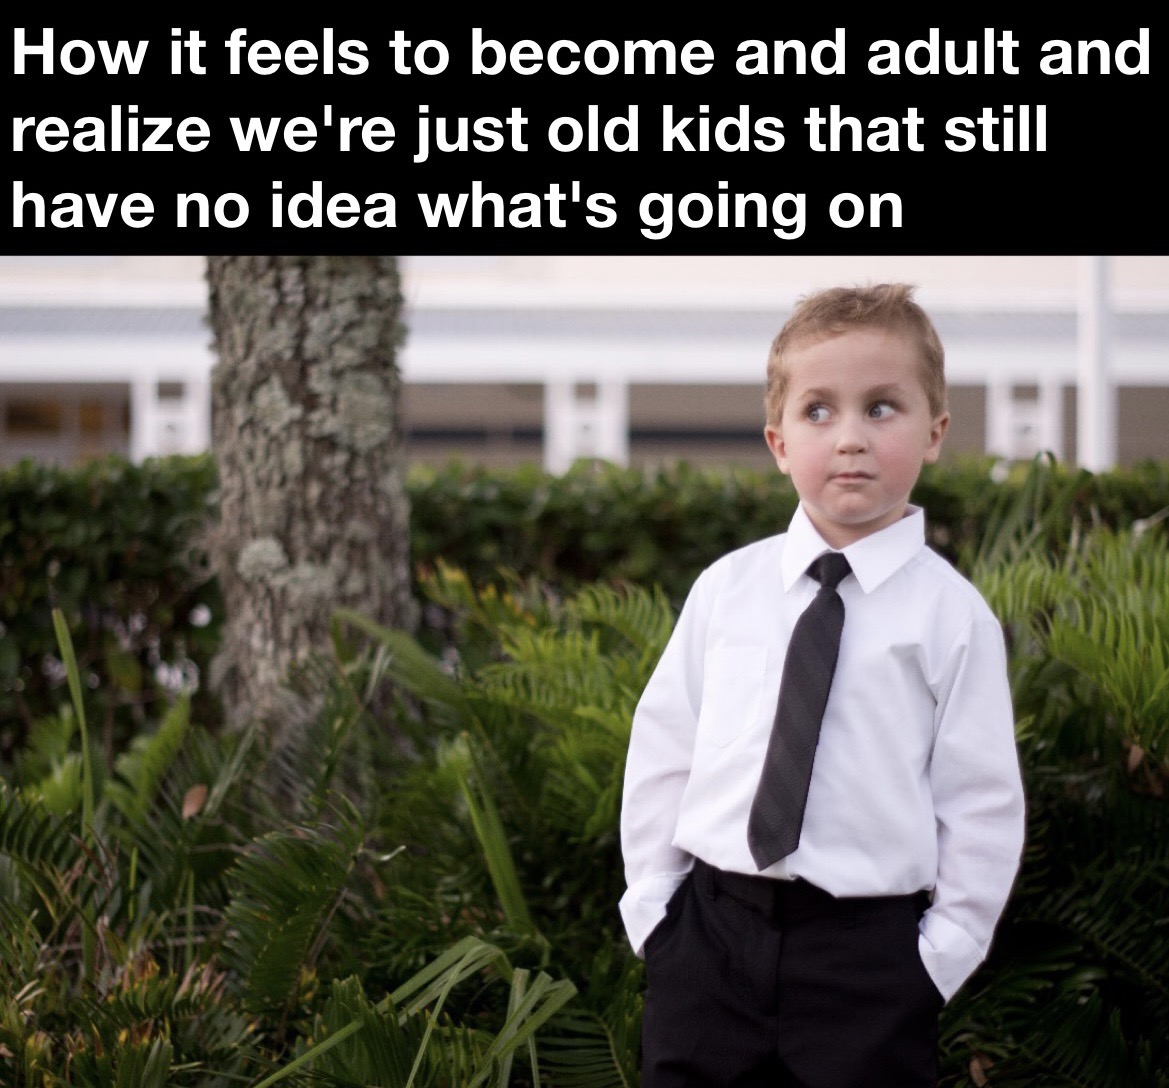 dank memes - grass - How it feels to become and adult and realize we're just old kids that still have no idea what's going on